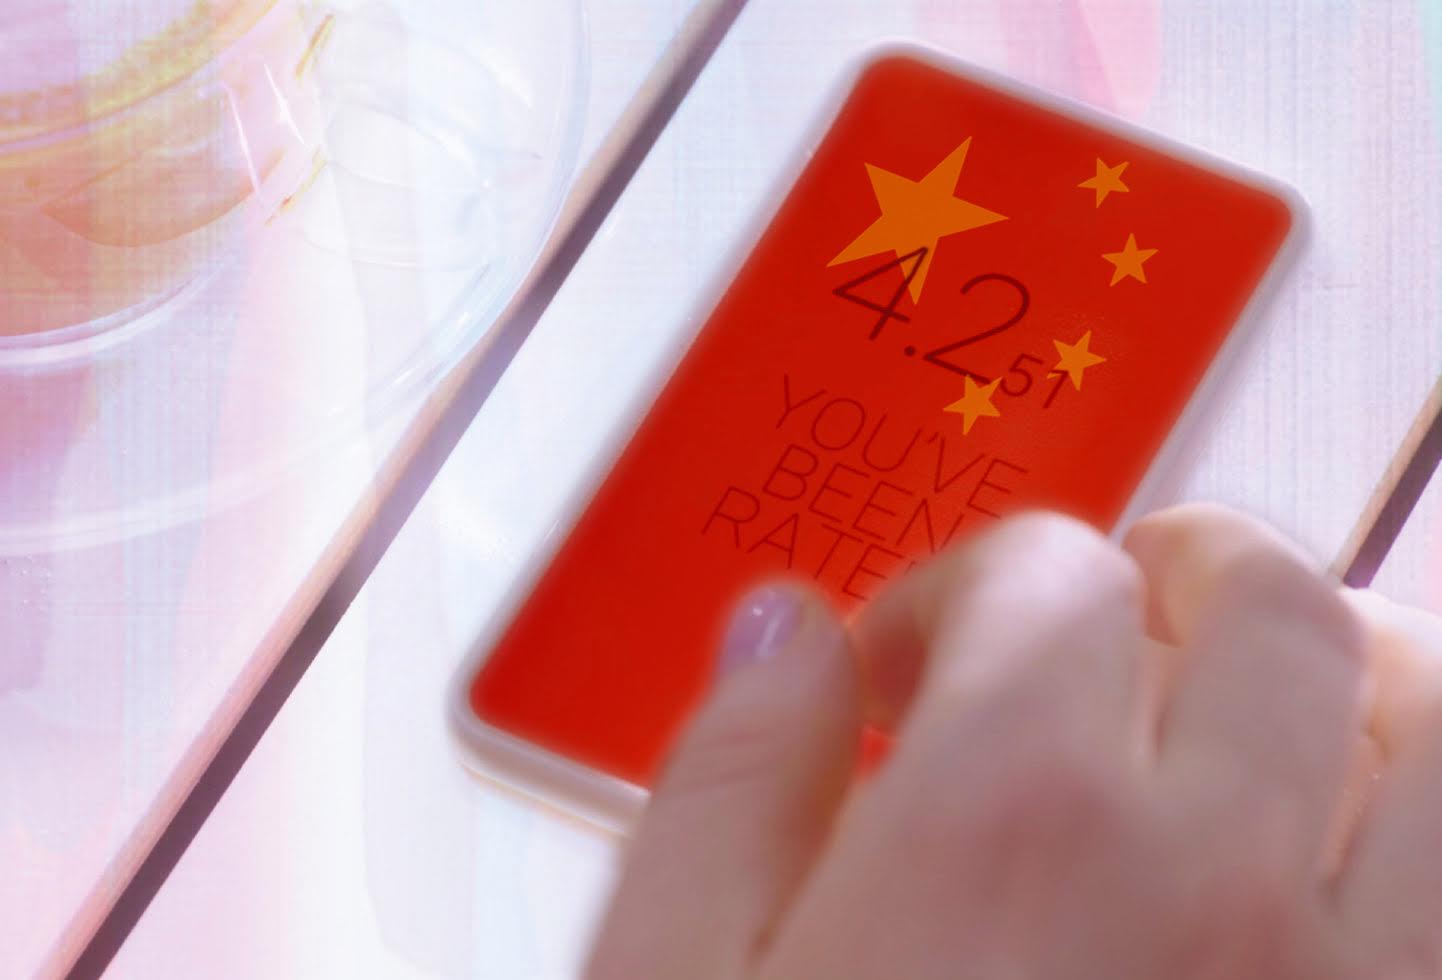 “Black Mirror” of big data in China: “yellow patches” for a new socialist utopia